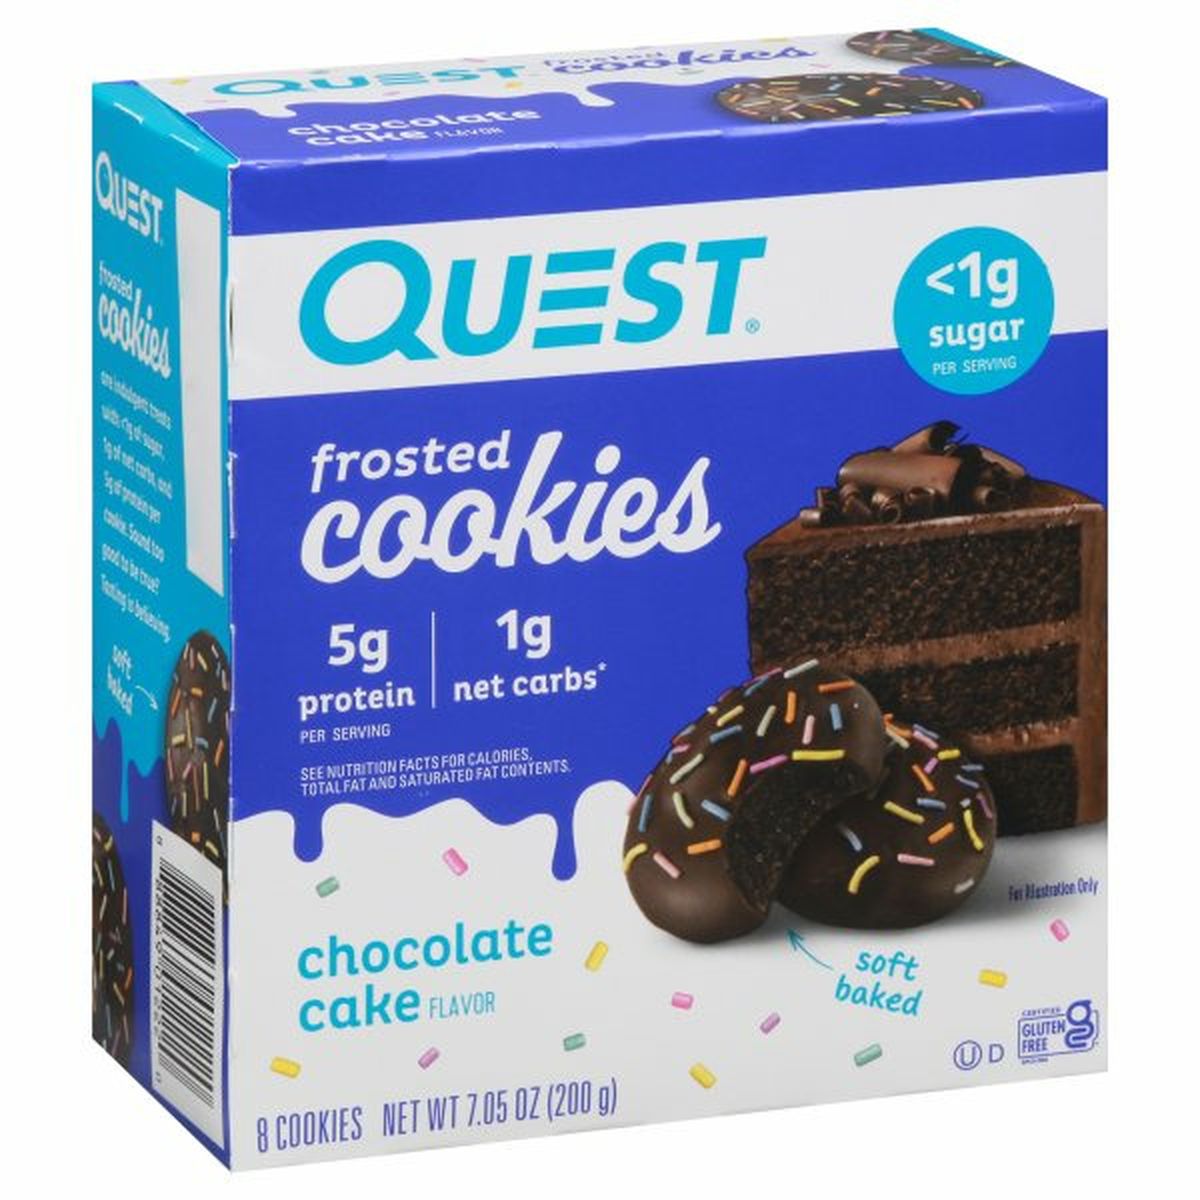 Calories in Quest Cookies, Frosted, Chocolate Cake Flavor